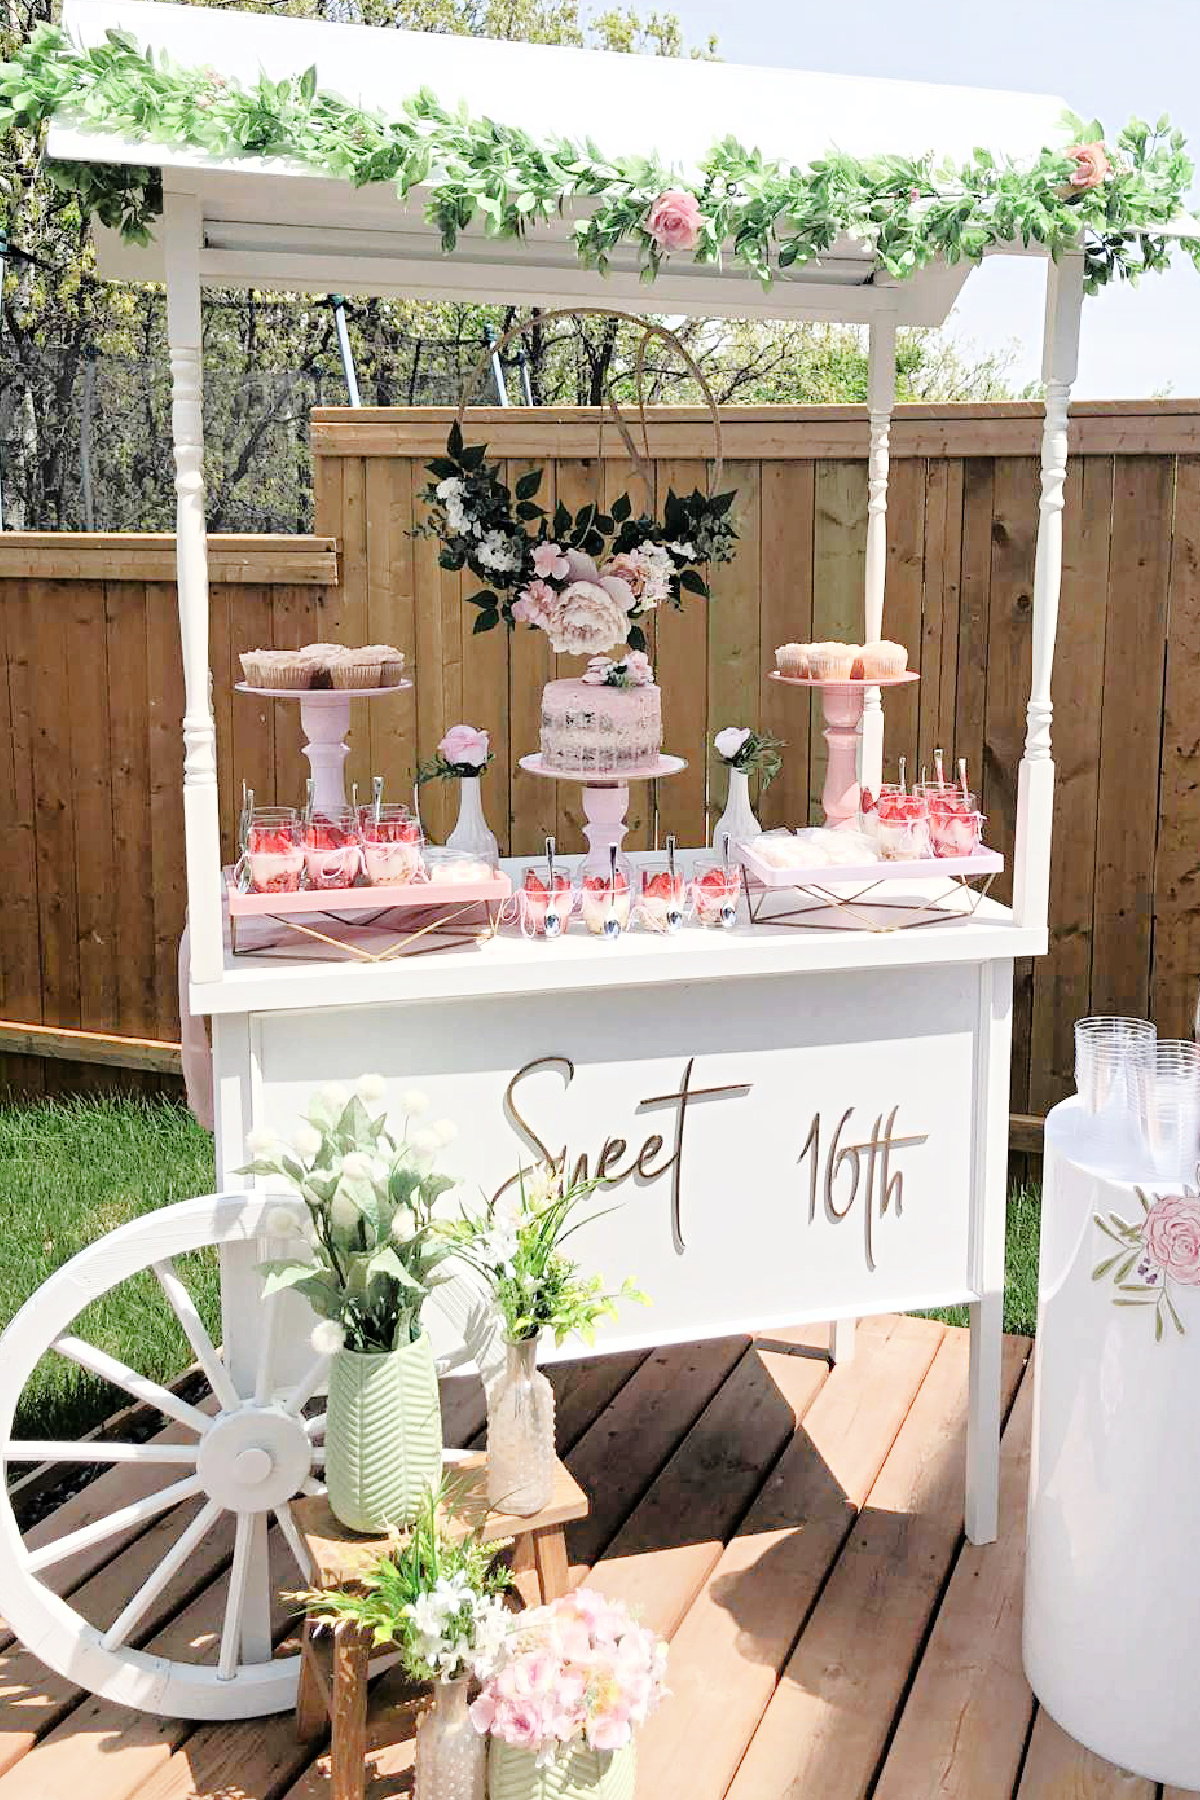 Sweet 16 - Floral Party